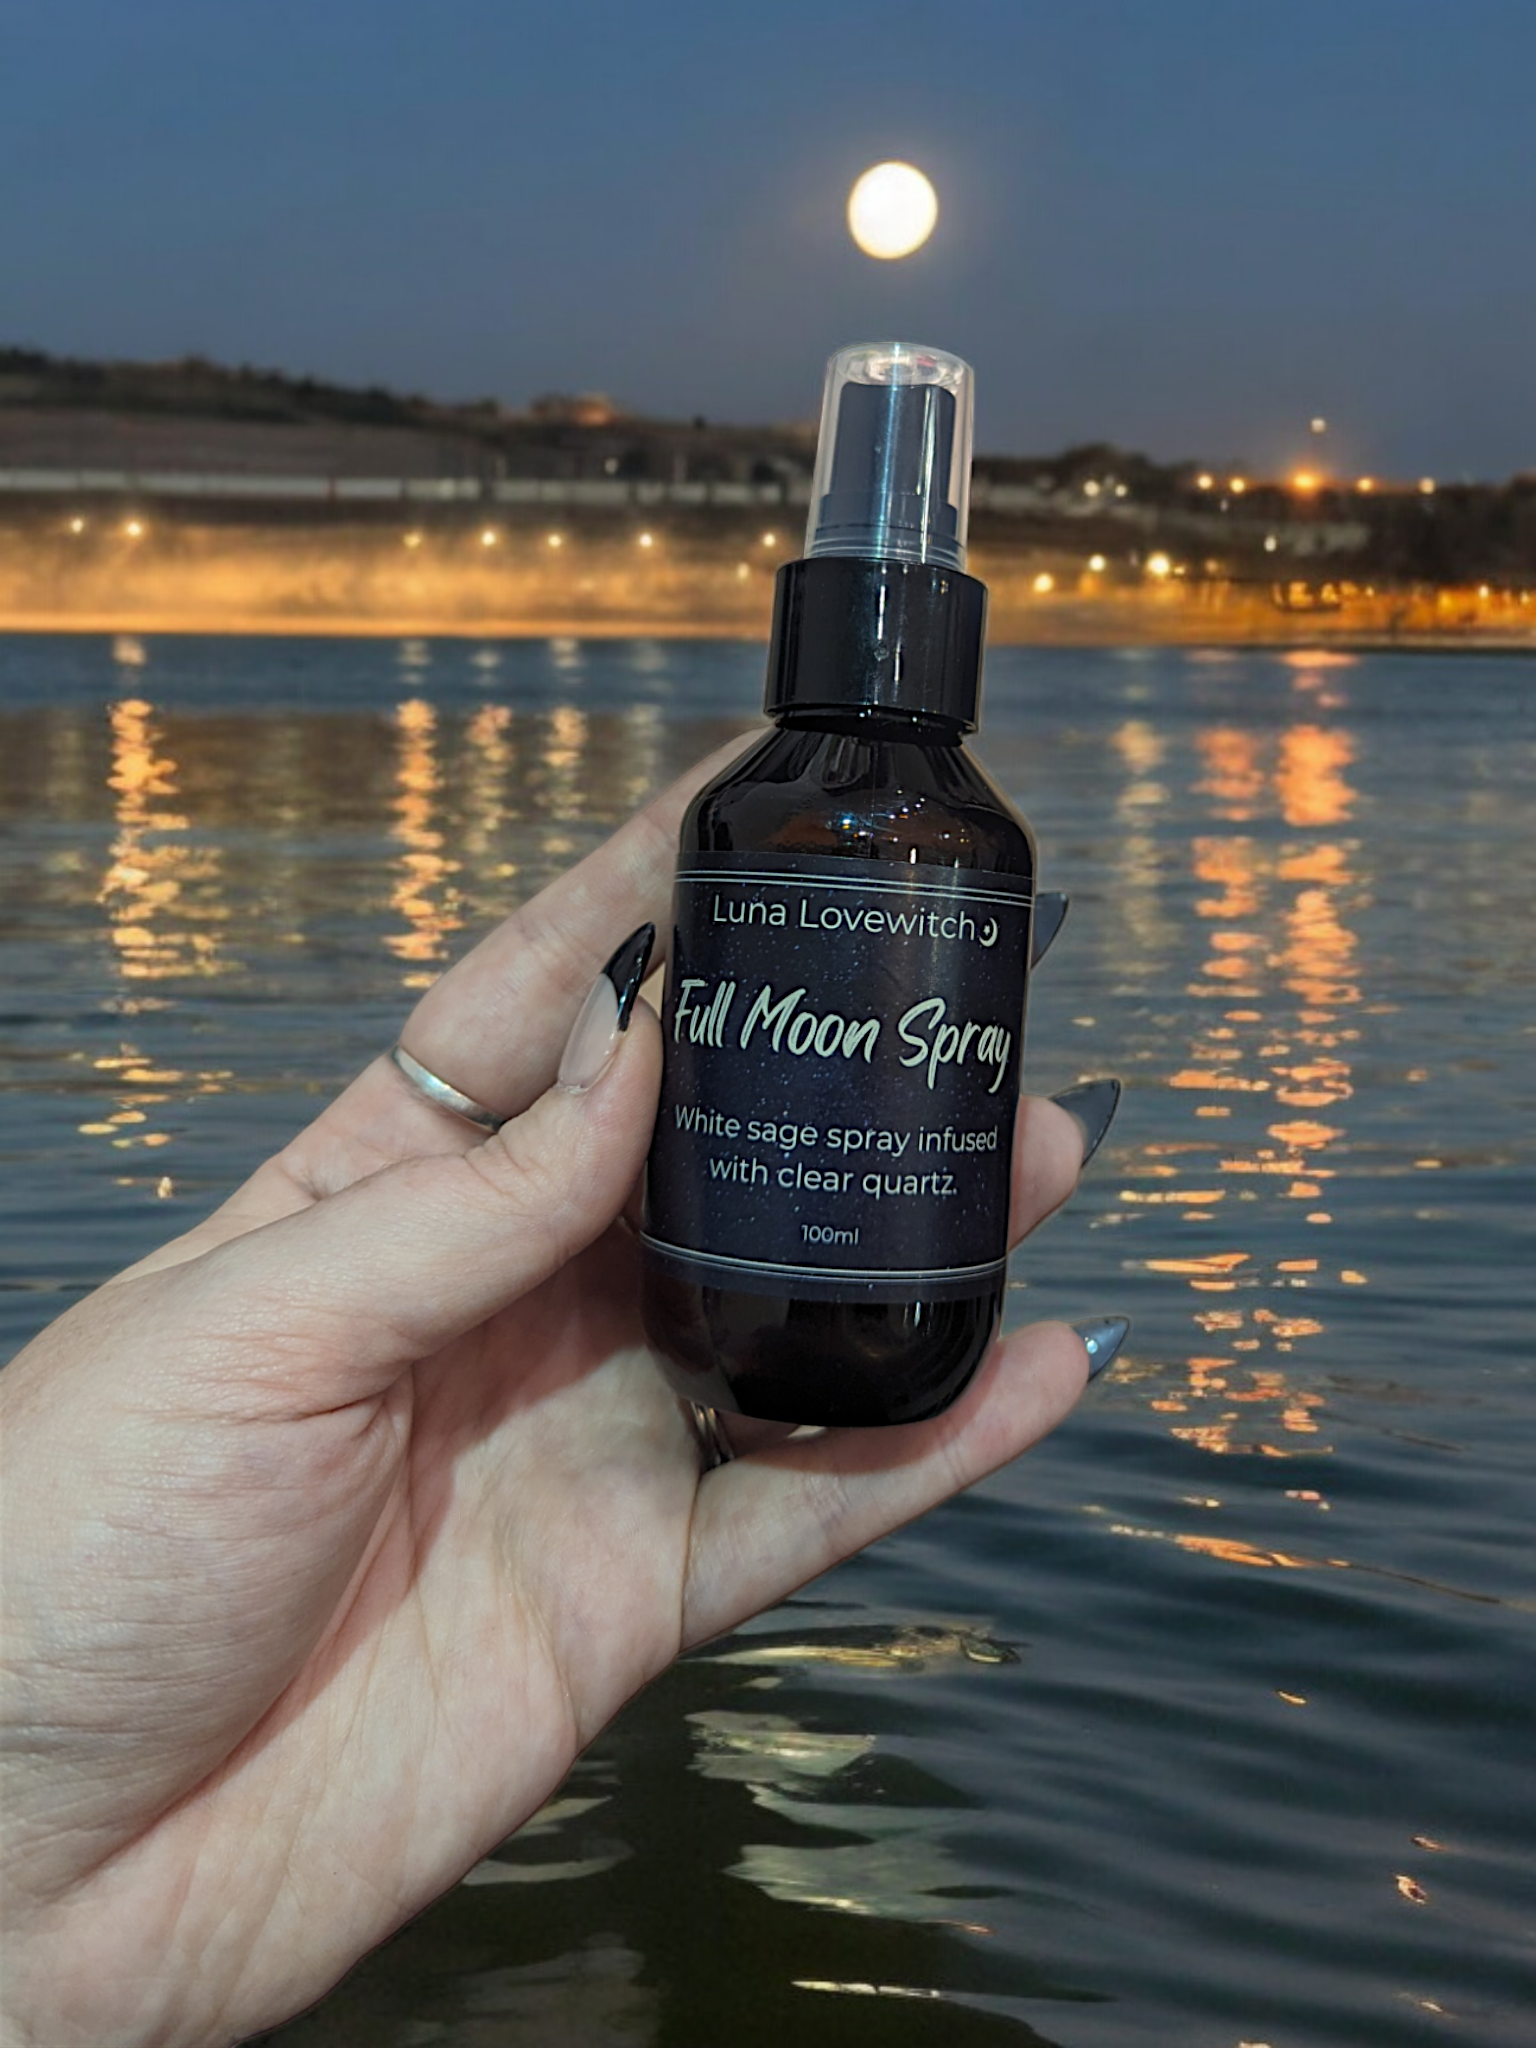 Luna Lovewitch Full moon spray - smokeless white sage spray infused with clear quartz